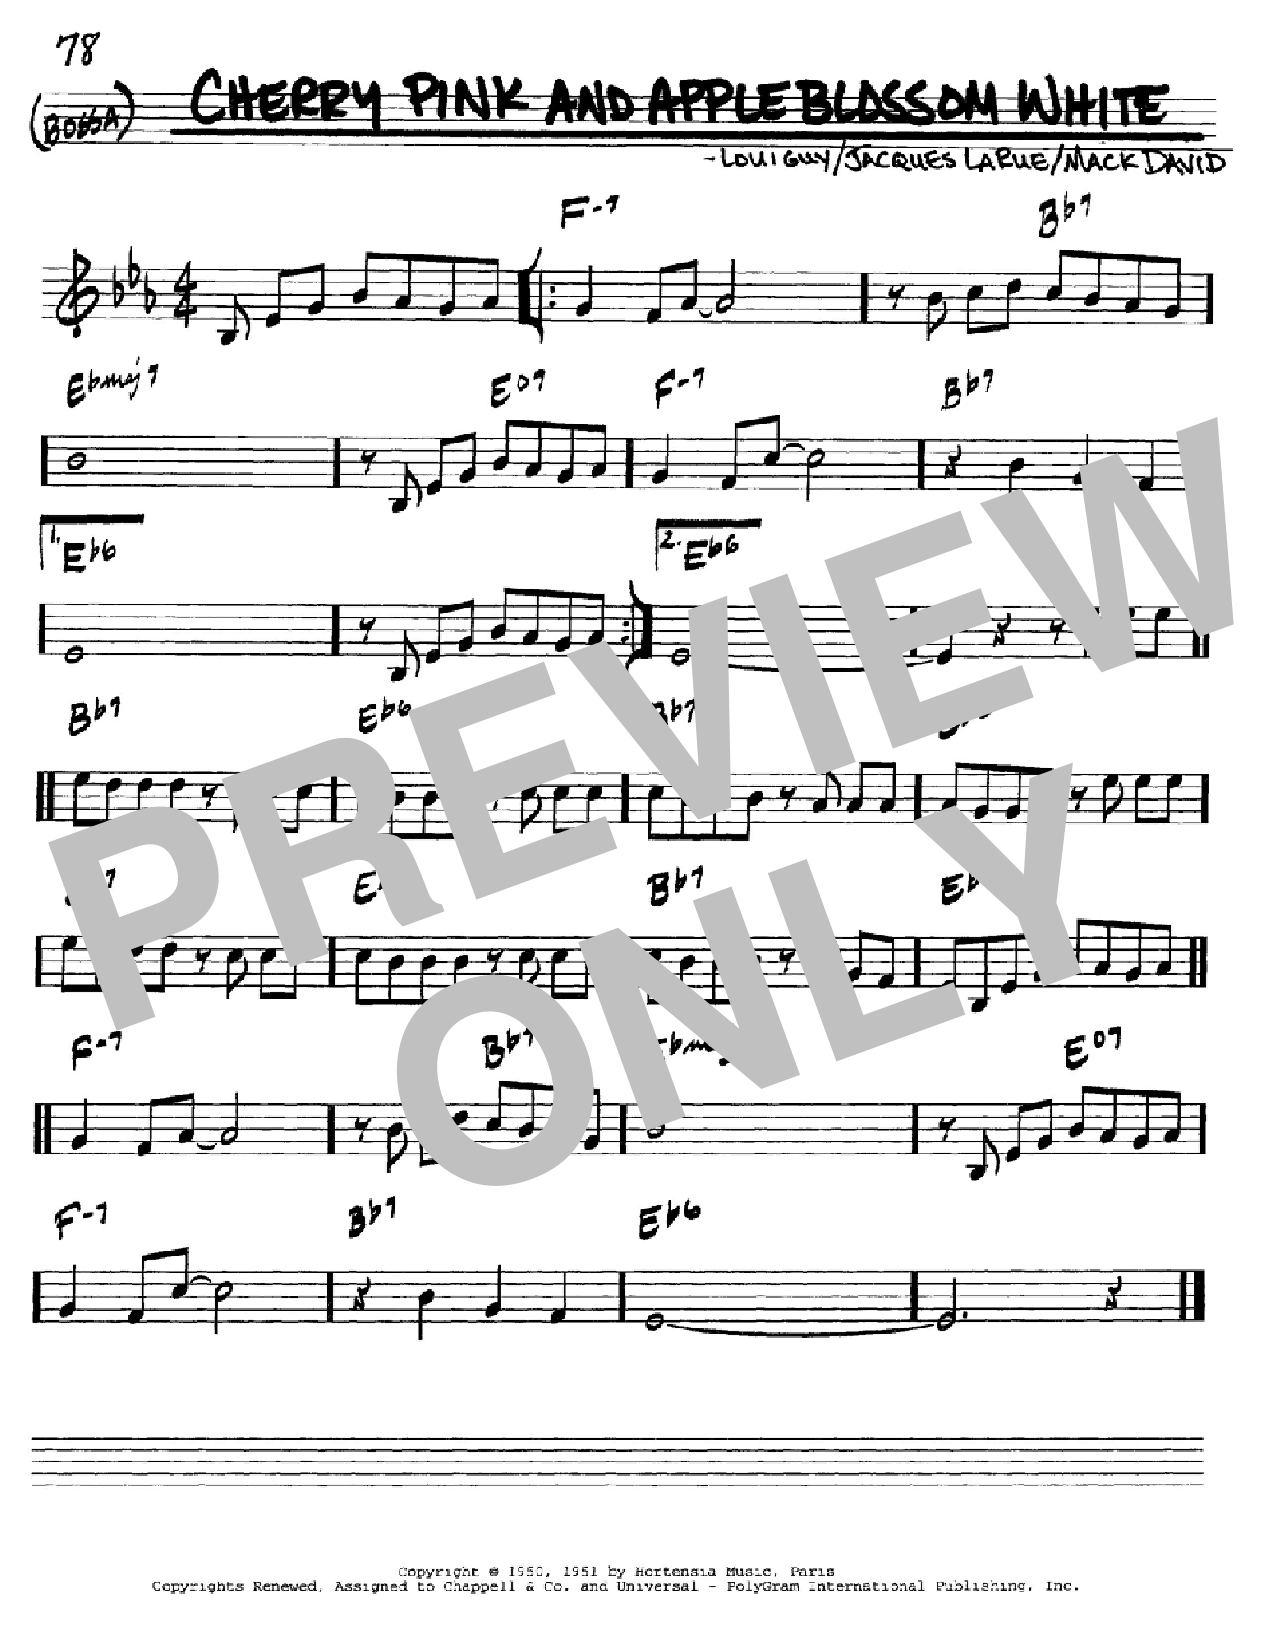 Mack David Cherry Pink And Apple Blossom White sheet music notes and chords. Download Printable PDF.